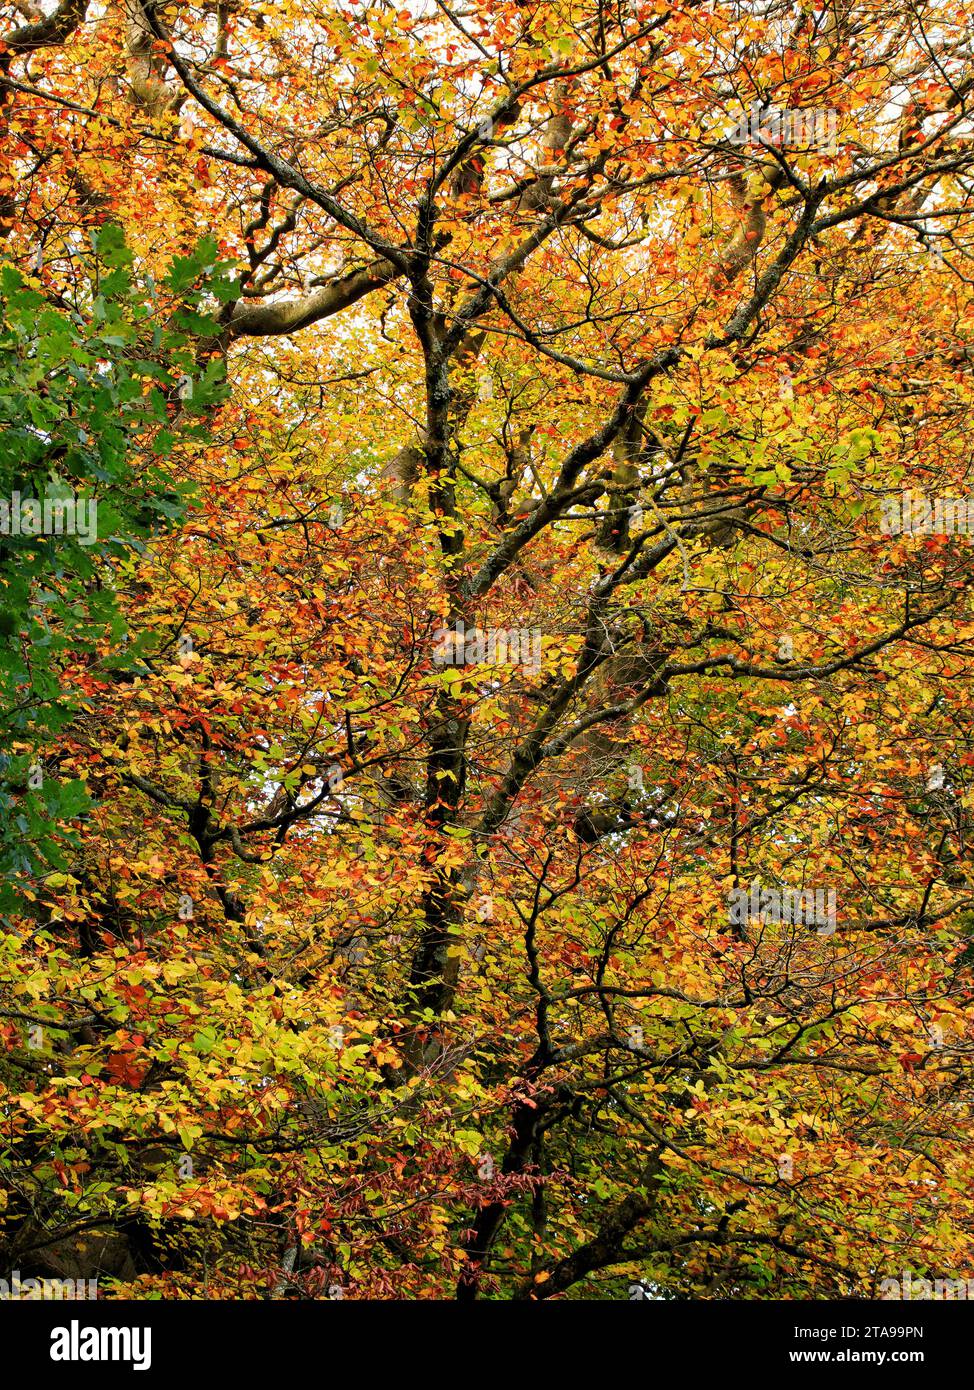 An abstract view of a tree, revealing autumn colours and the random pattern of nature, in portrait format Stock Photo